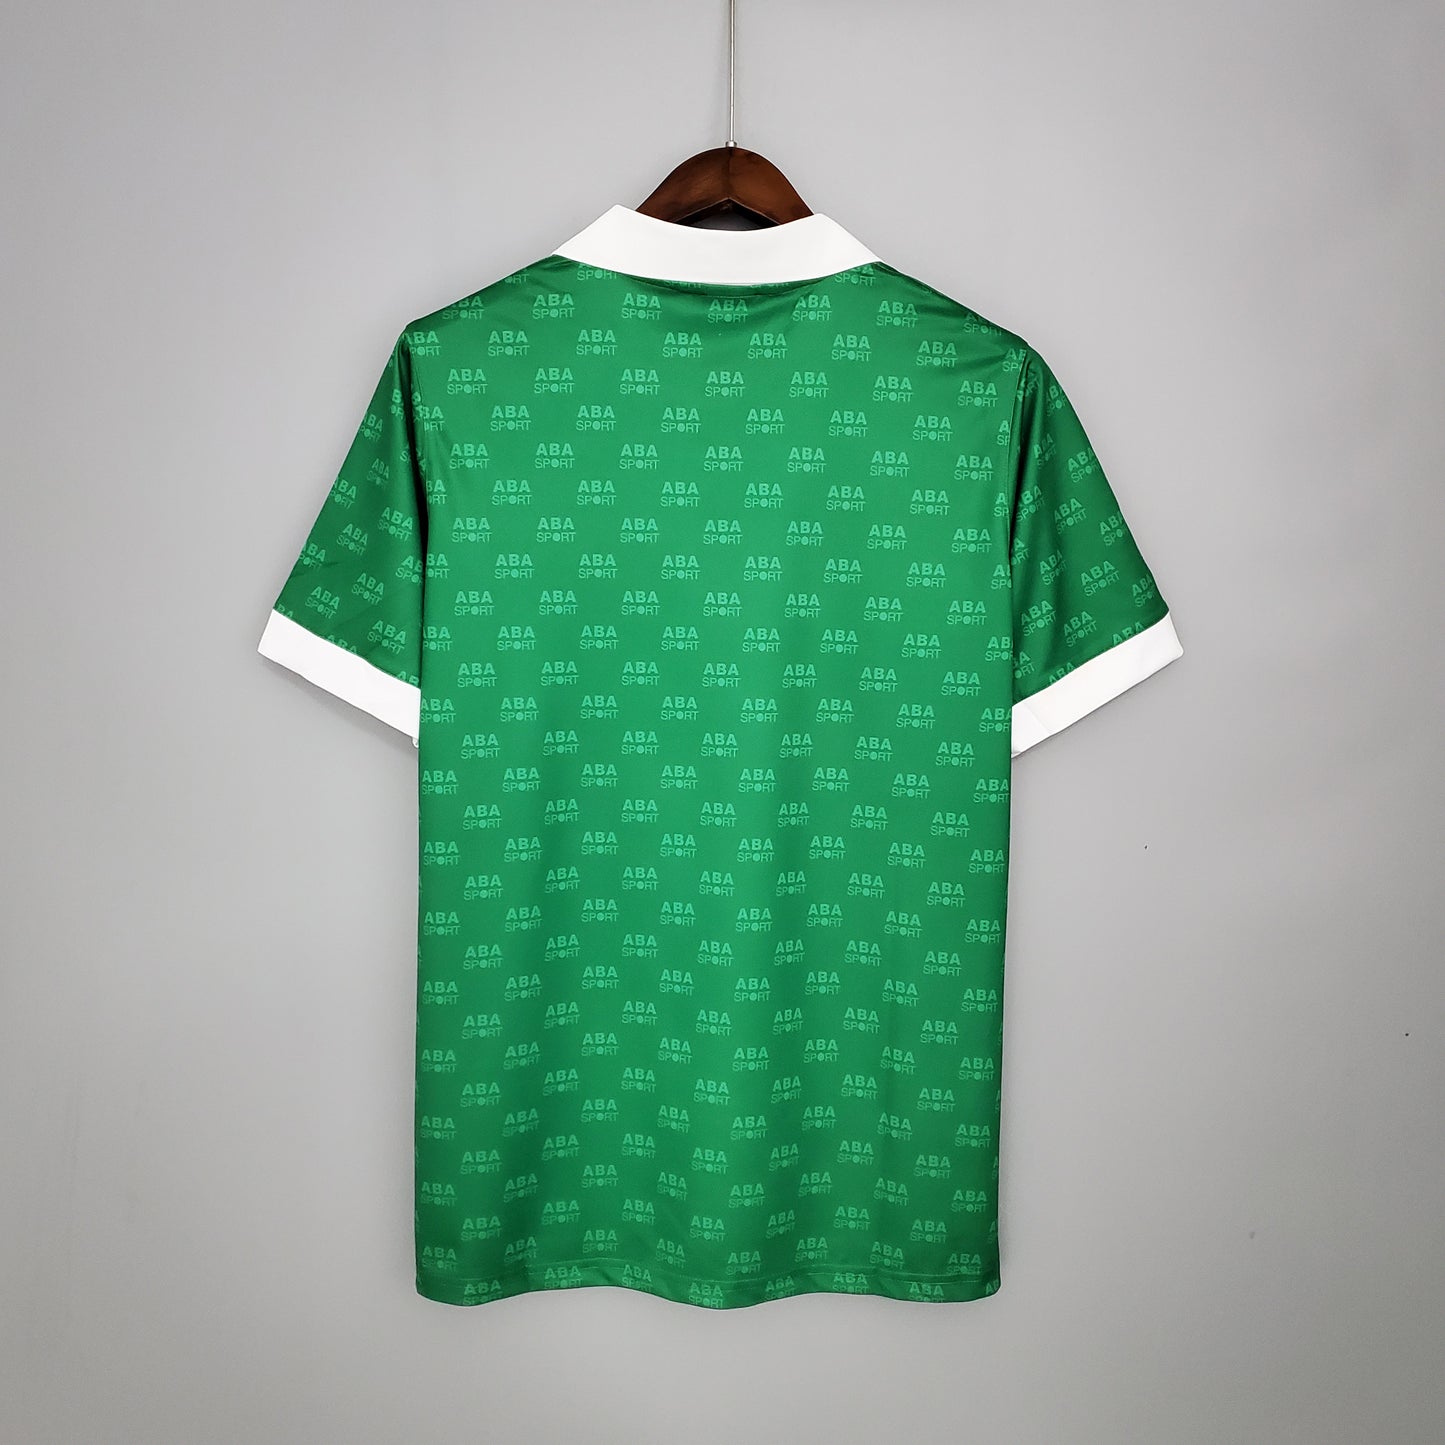 MEXICO 1995 HOME JERSEY